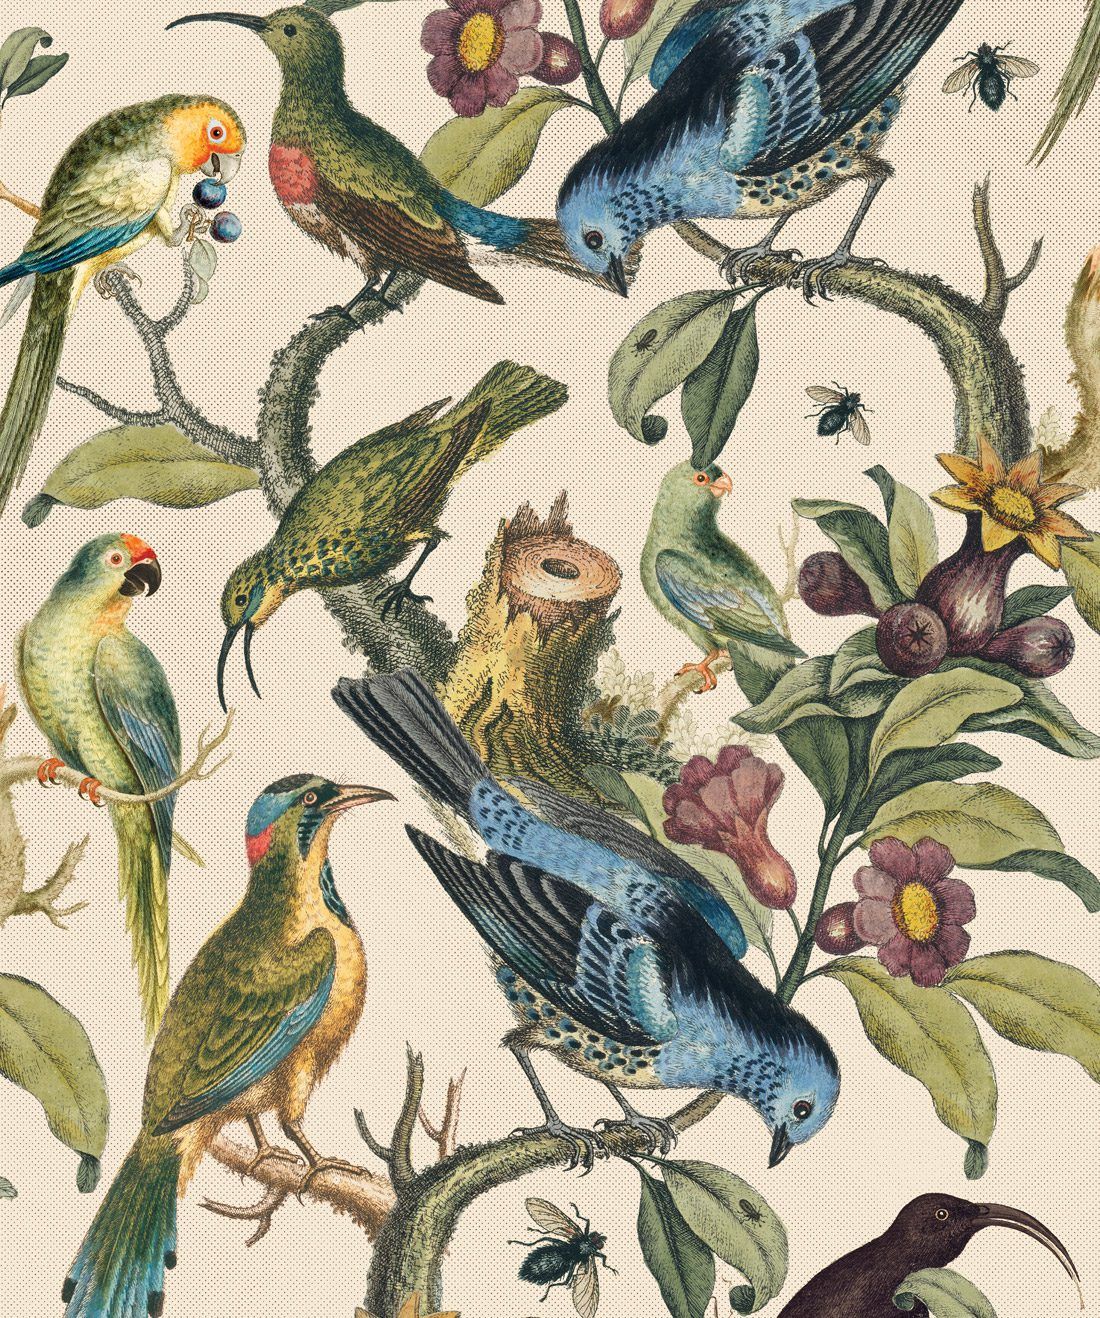 Ornithology is a bird and branch wallpaper